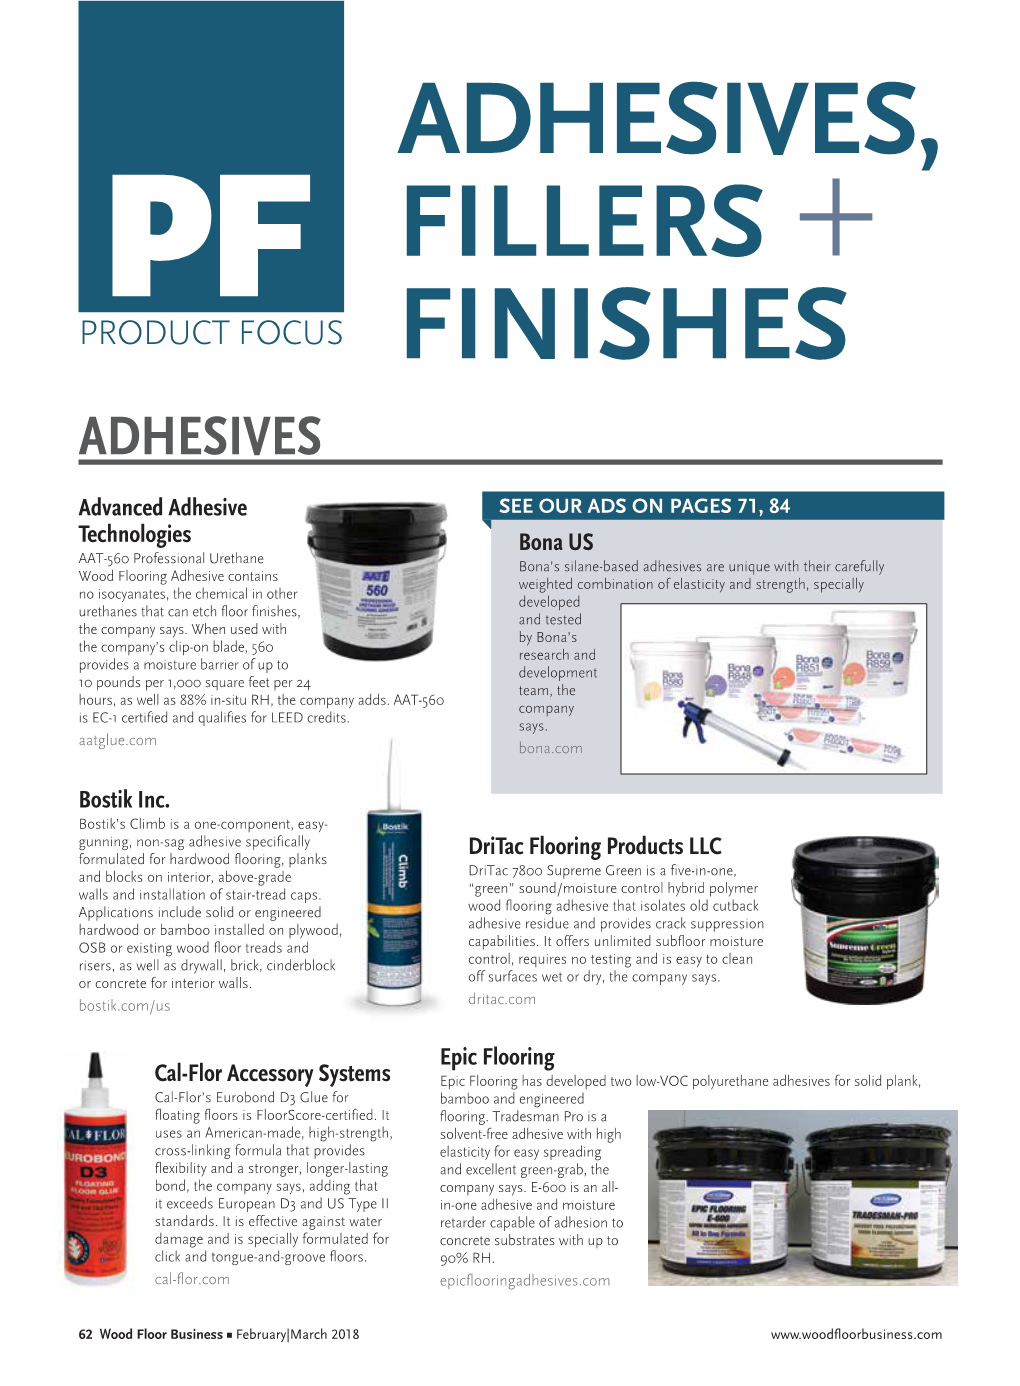 Adhesives, Fillers + Finishes